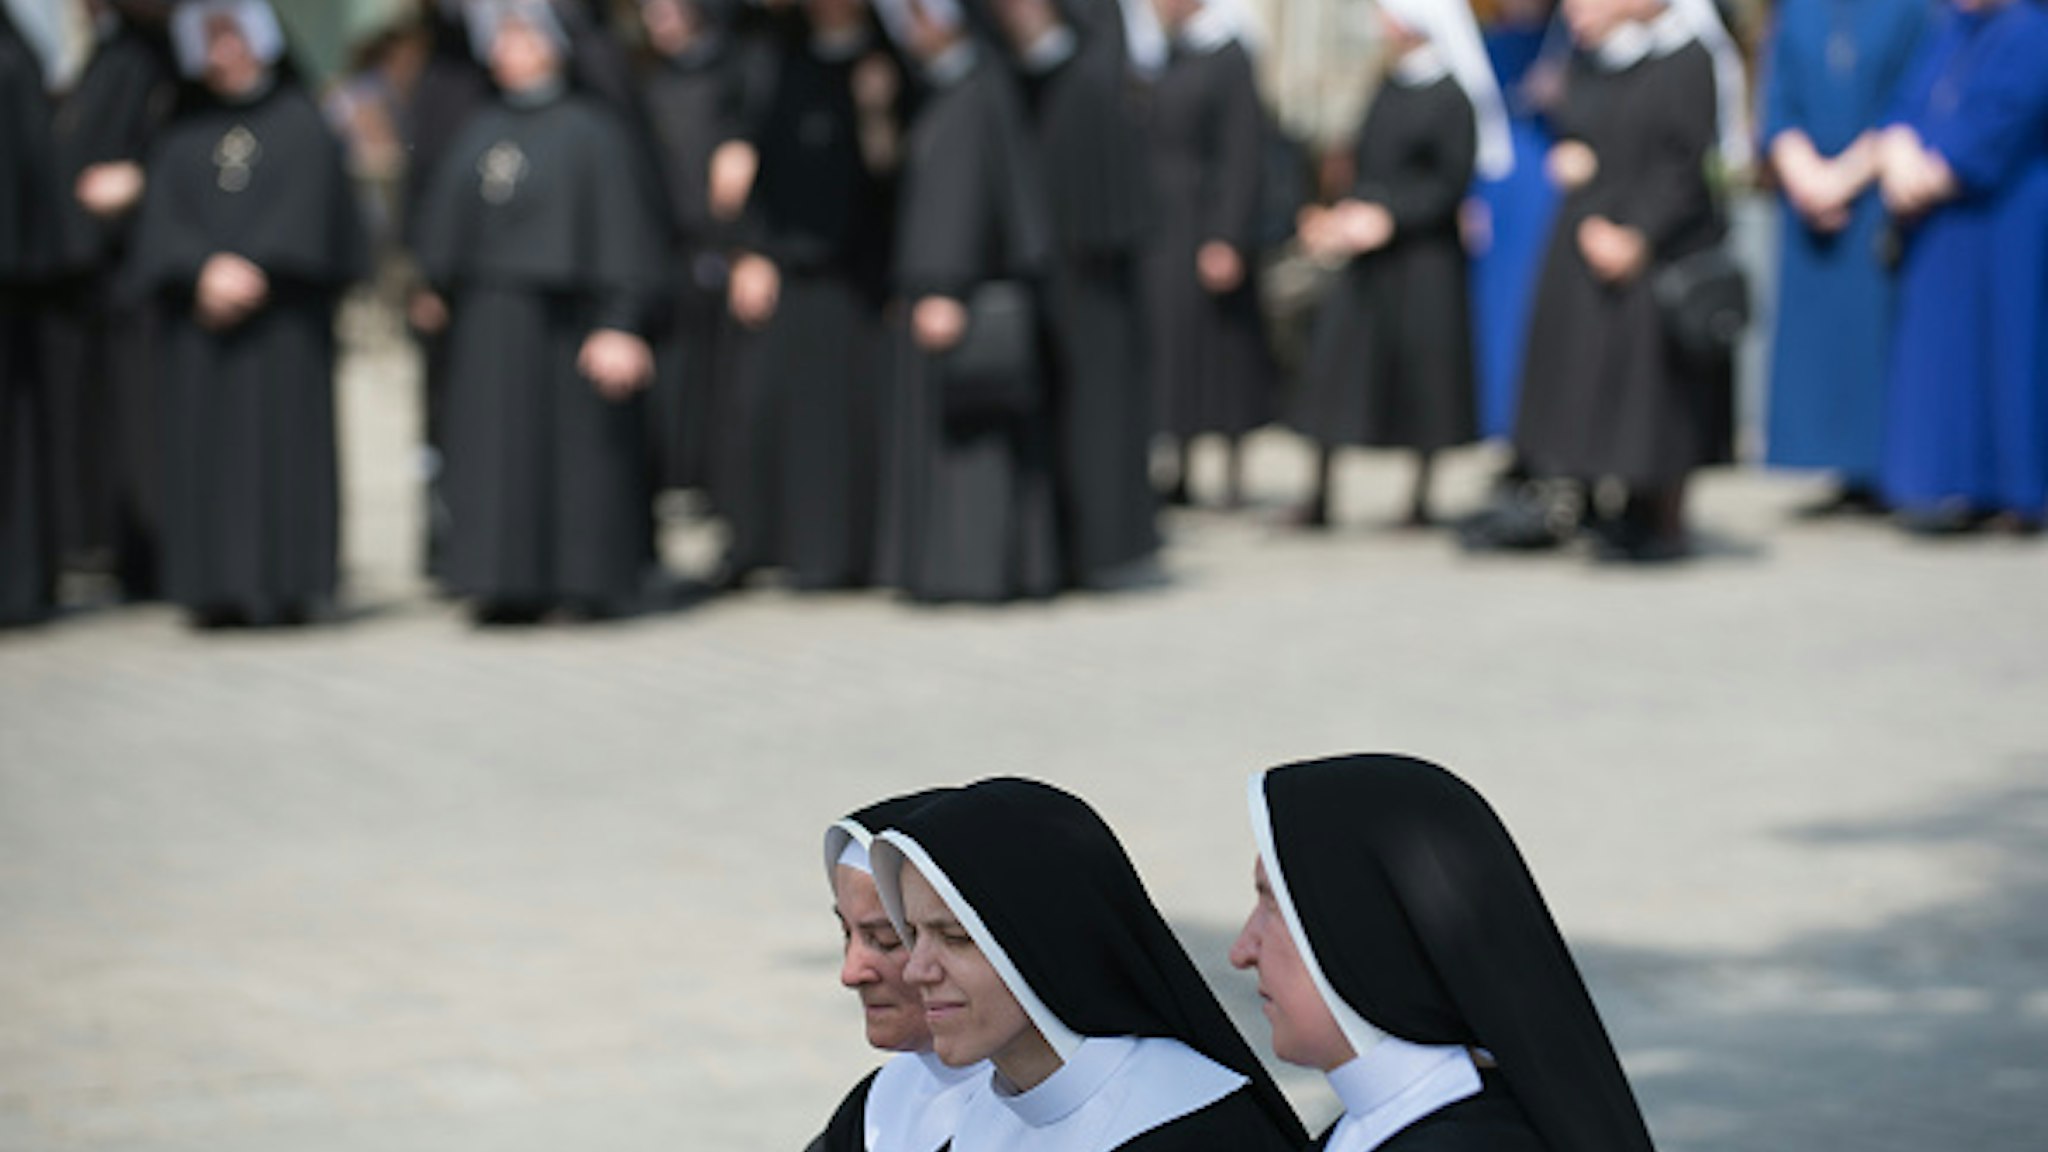 KRAKOW, POLAND - 2018/05/31: Three nuns take a rest under a tree during the Corpus Christi procession in Krakow. The Feast of Corpus Christi or Body of Christ, is the Roman Rite liturgical solemnity celebrating the real presence of the body and blood of Jesus Christ, the Son of God, in the Eucharist . Corpus Christi takes place 60 days after Easter, and every year the procession starts at Wael Castle and ends at the Main Square.